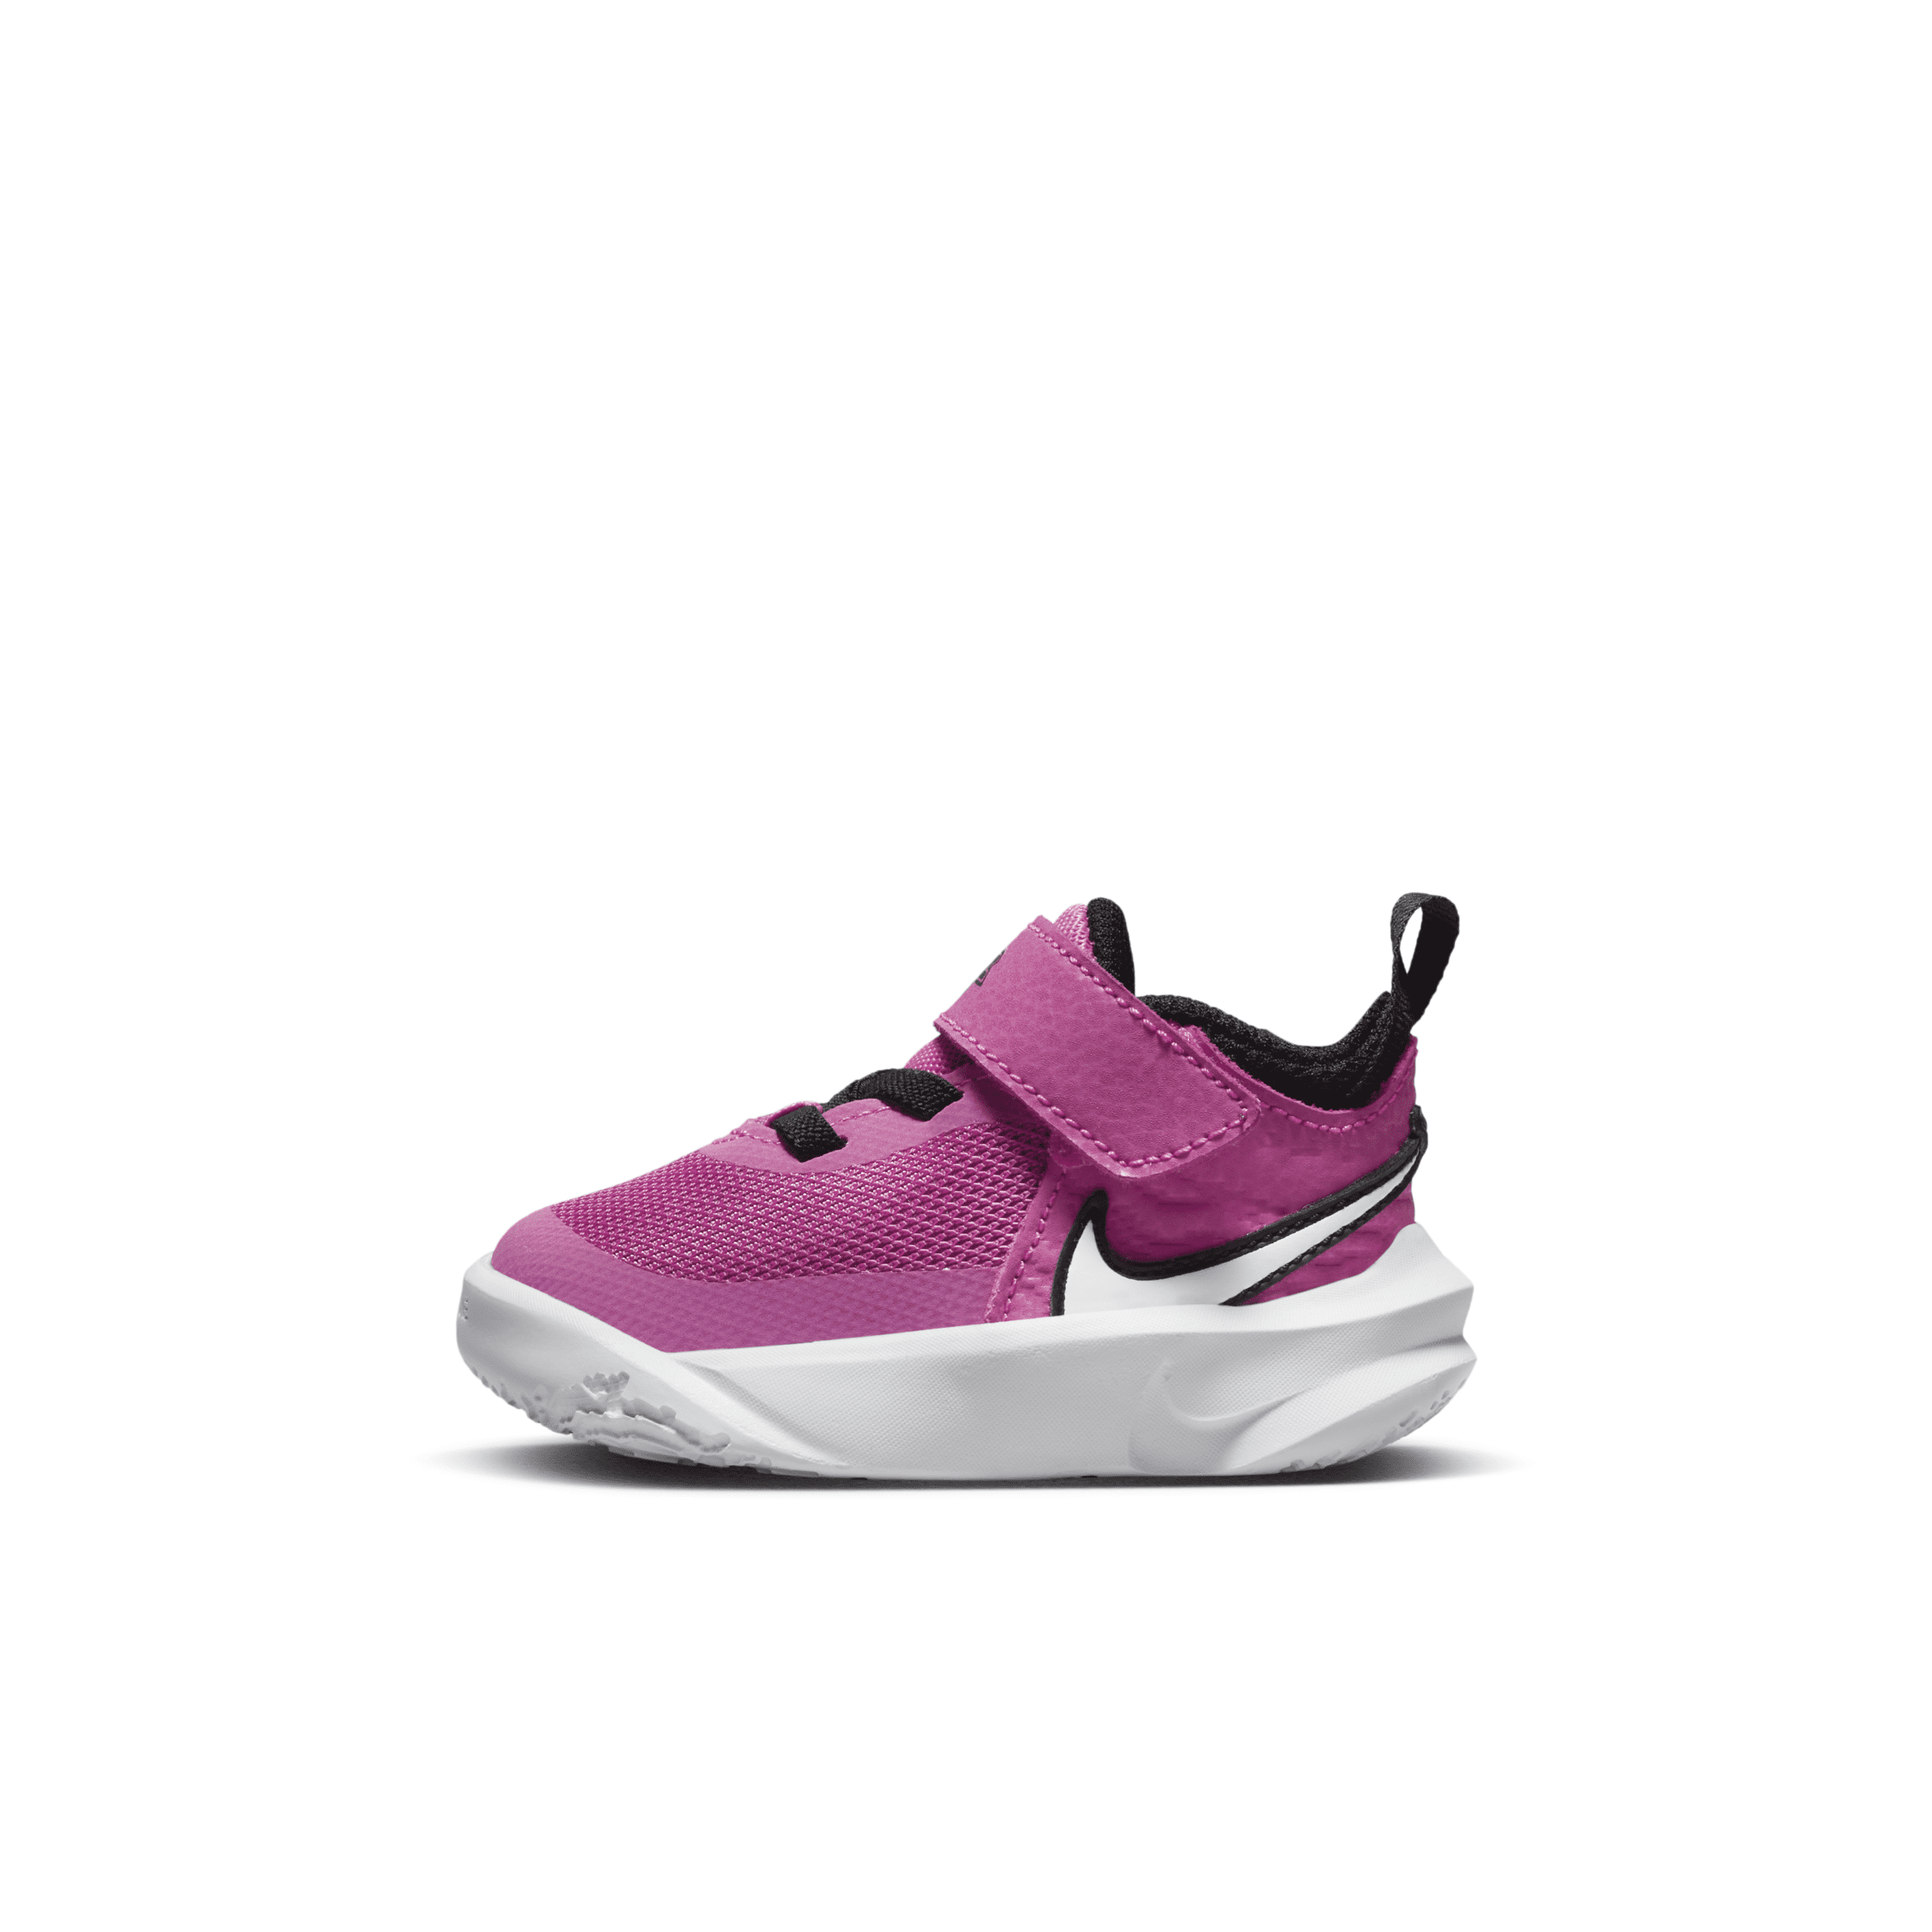 Nike Team Hustle D 10 Baby/toddler Shoes In Pink